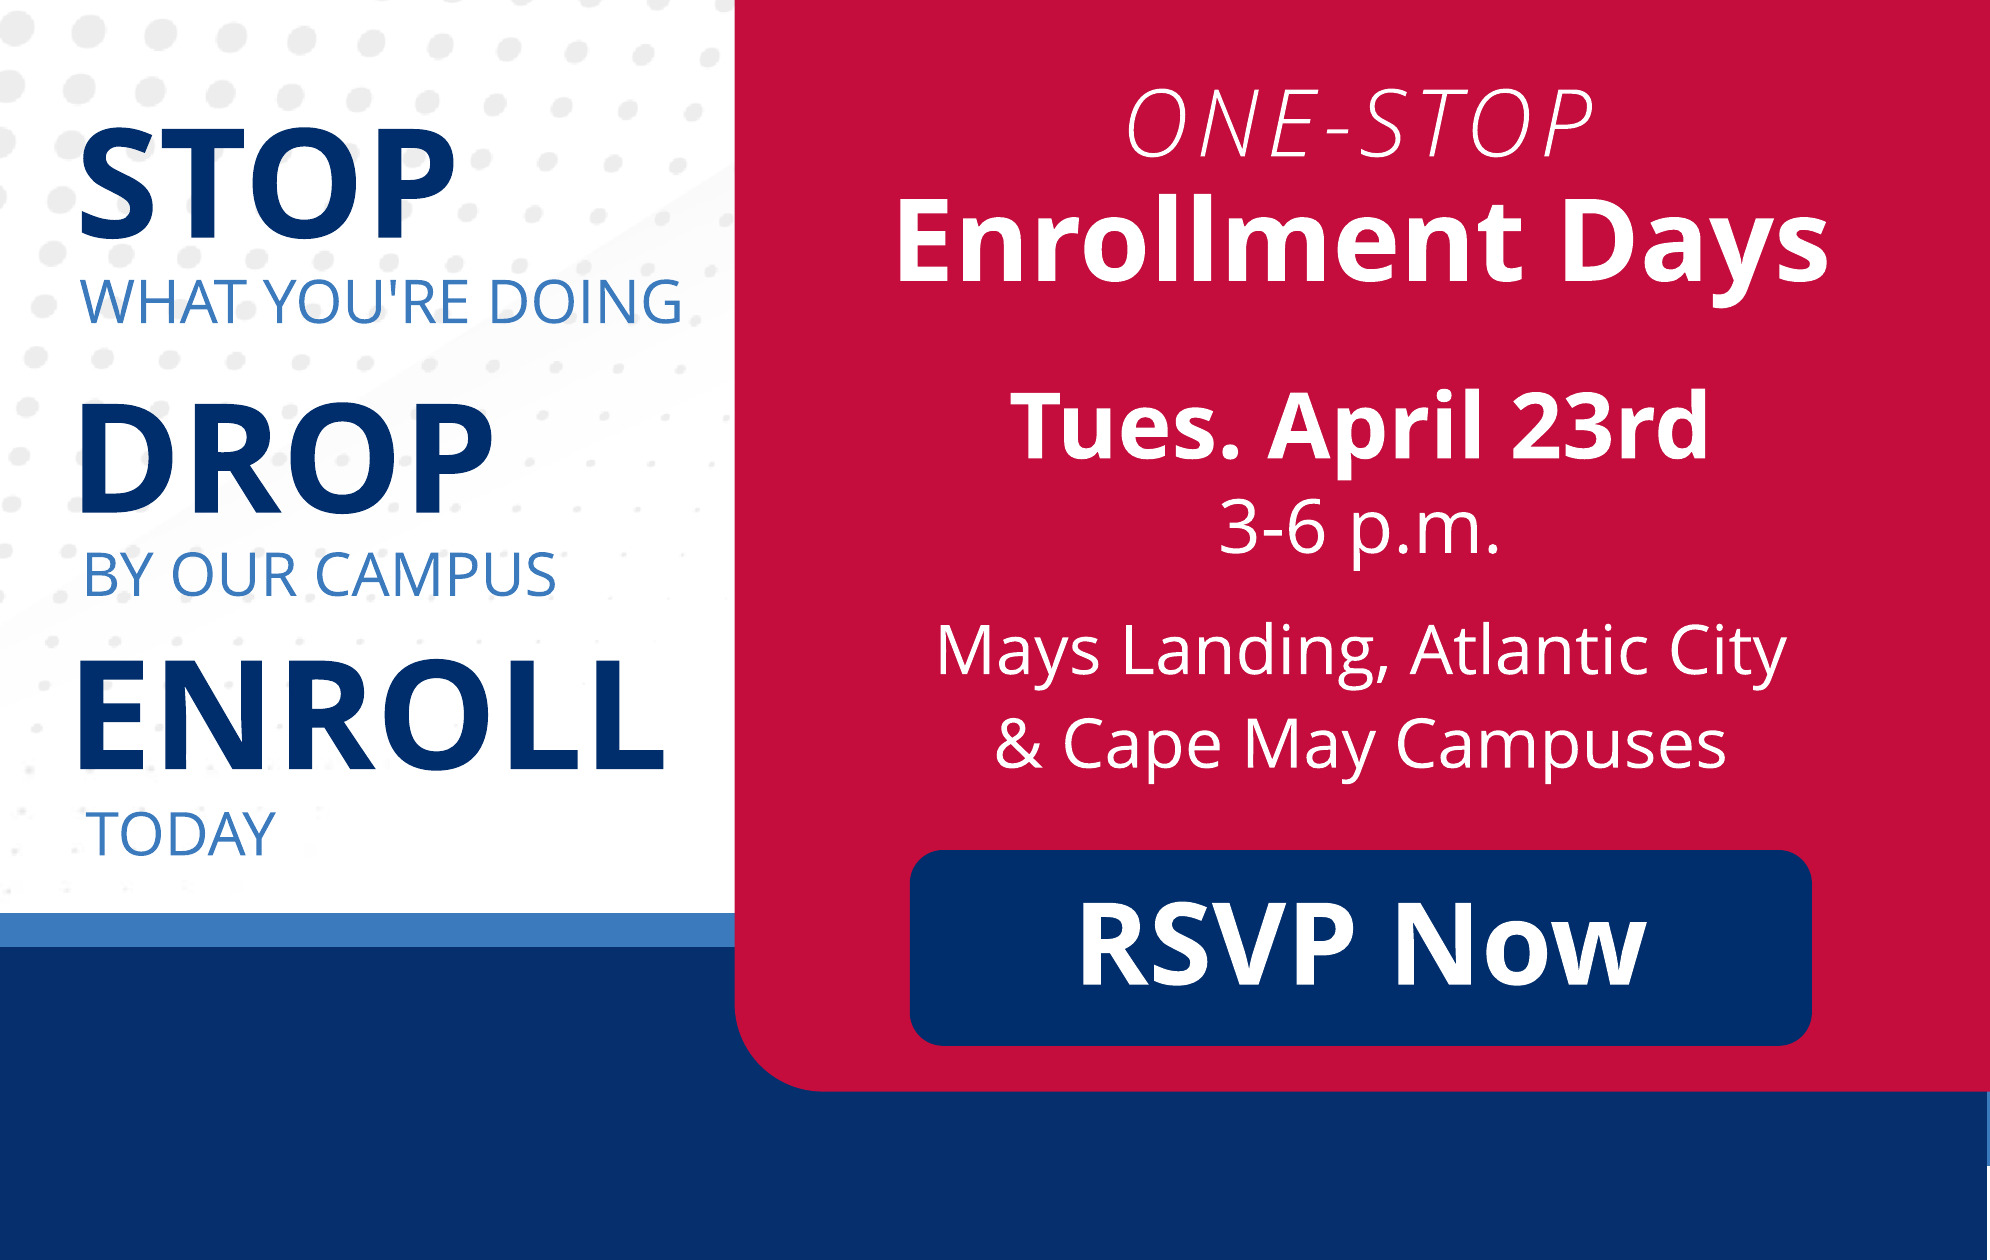 Stop, Drop and Enroll for April 23 on all campuses.